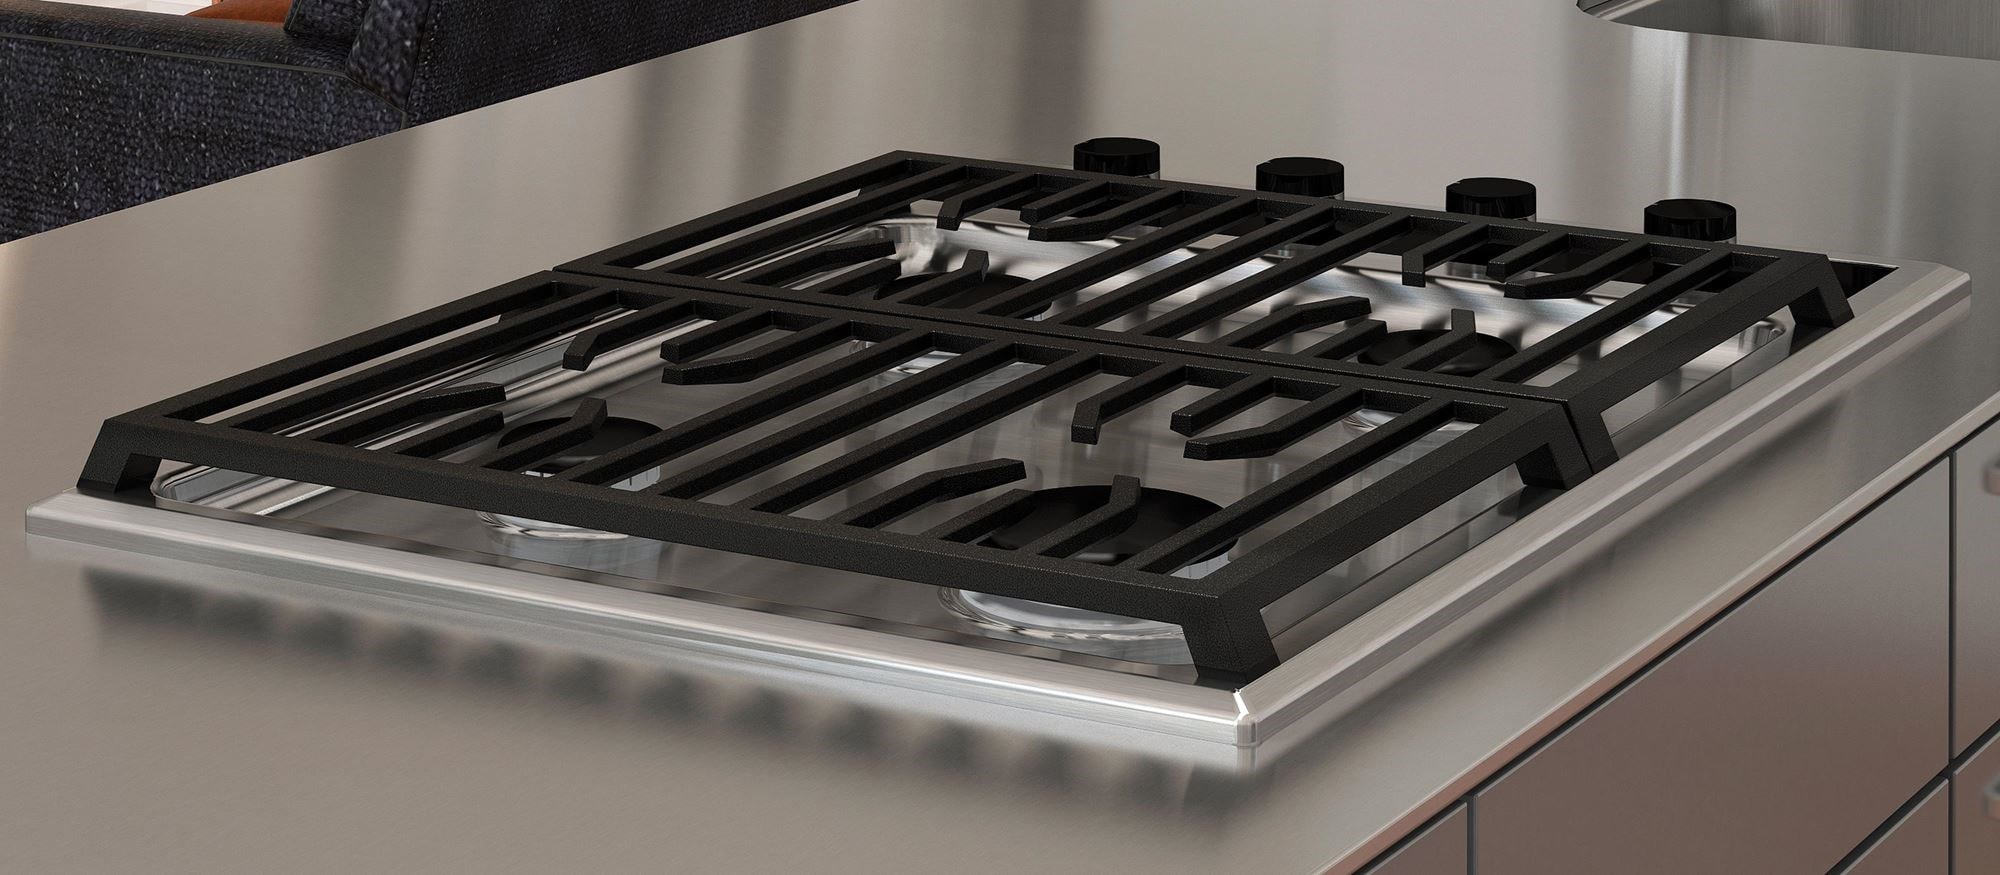 30 Professional Gas Cooktop - 4 Burners